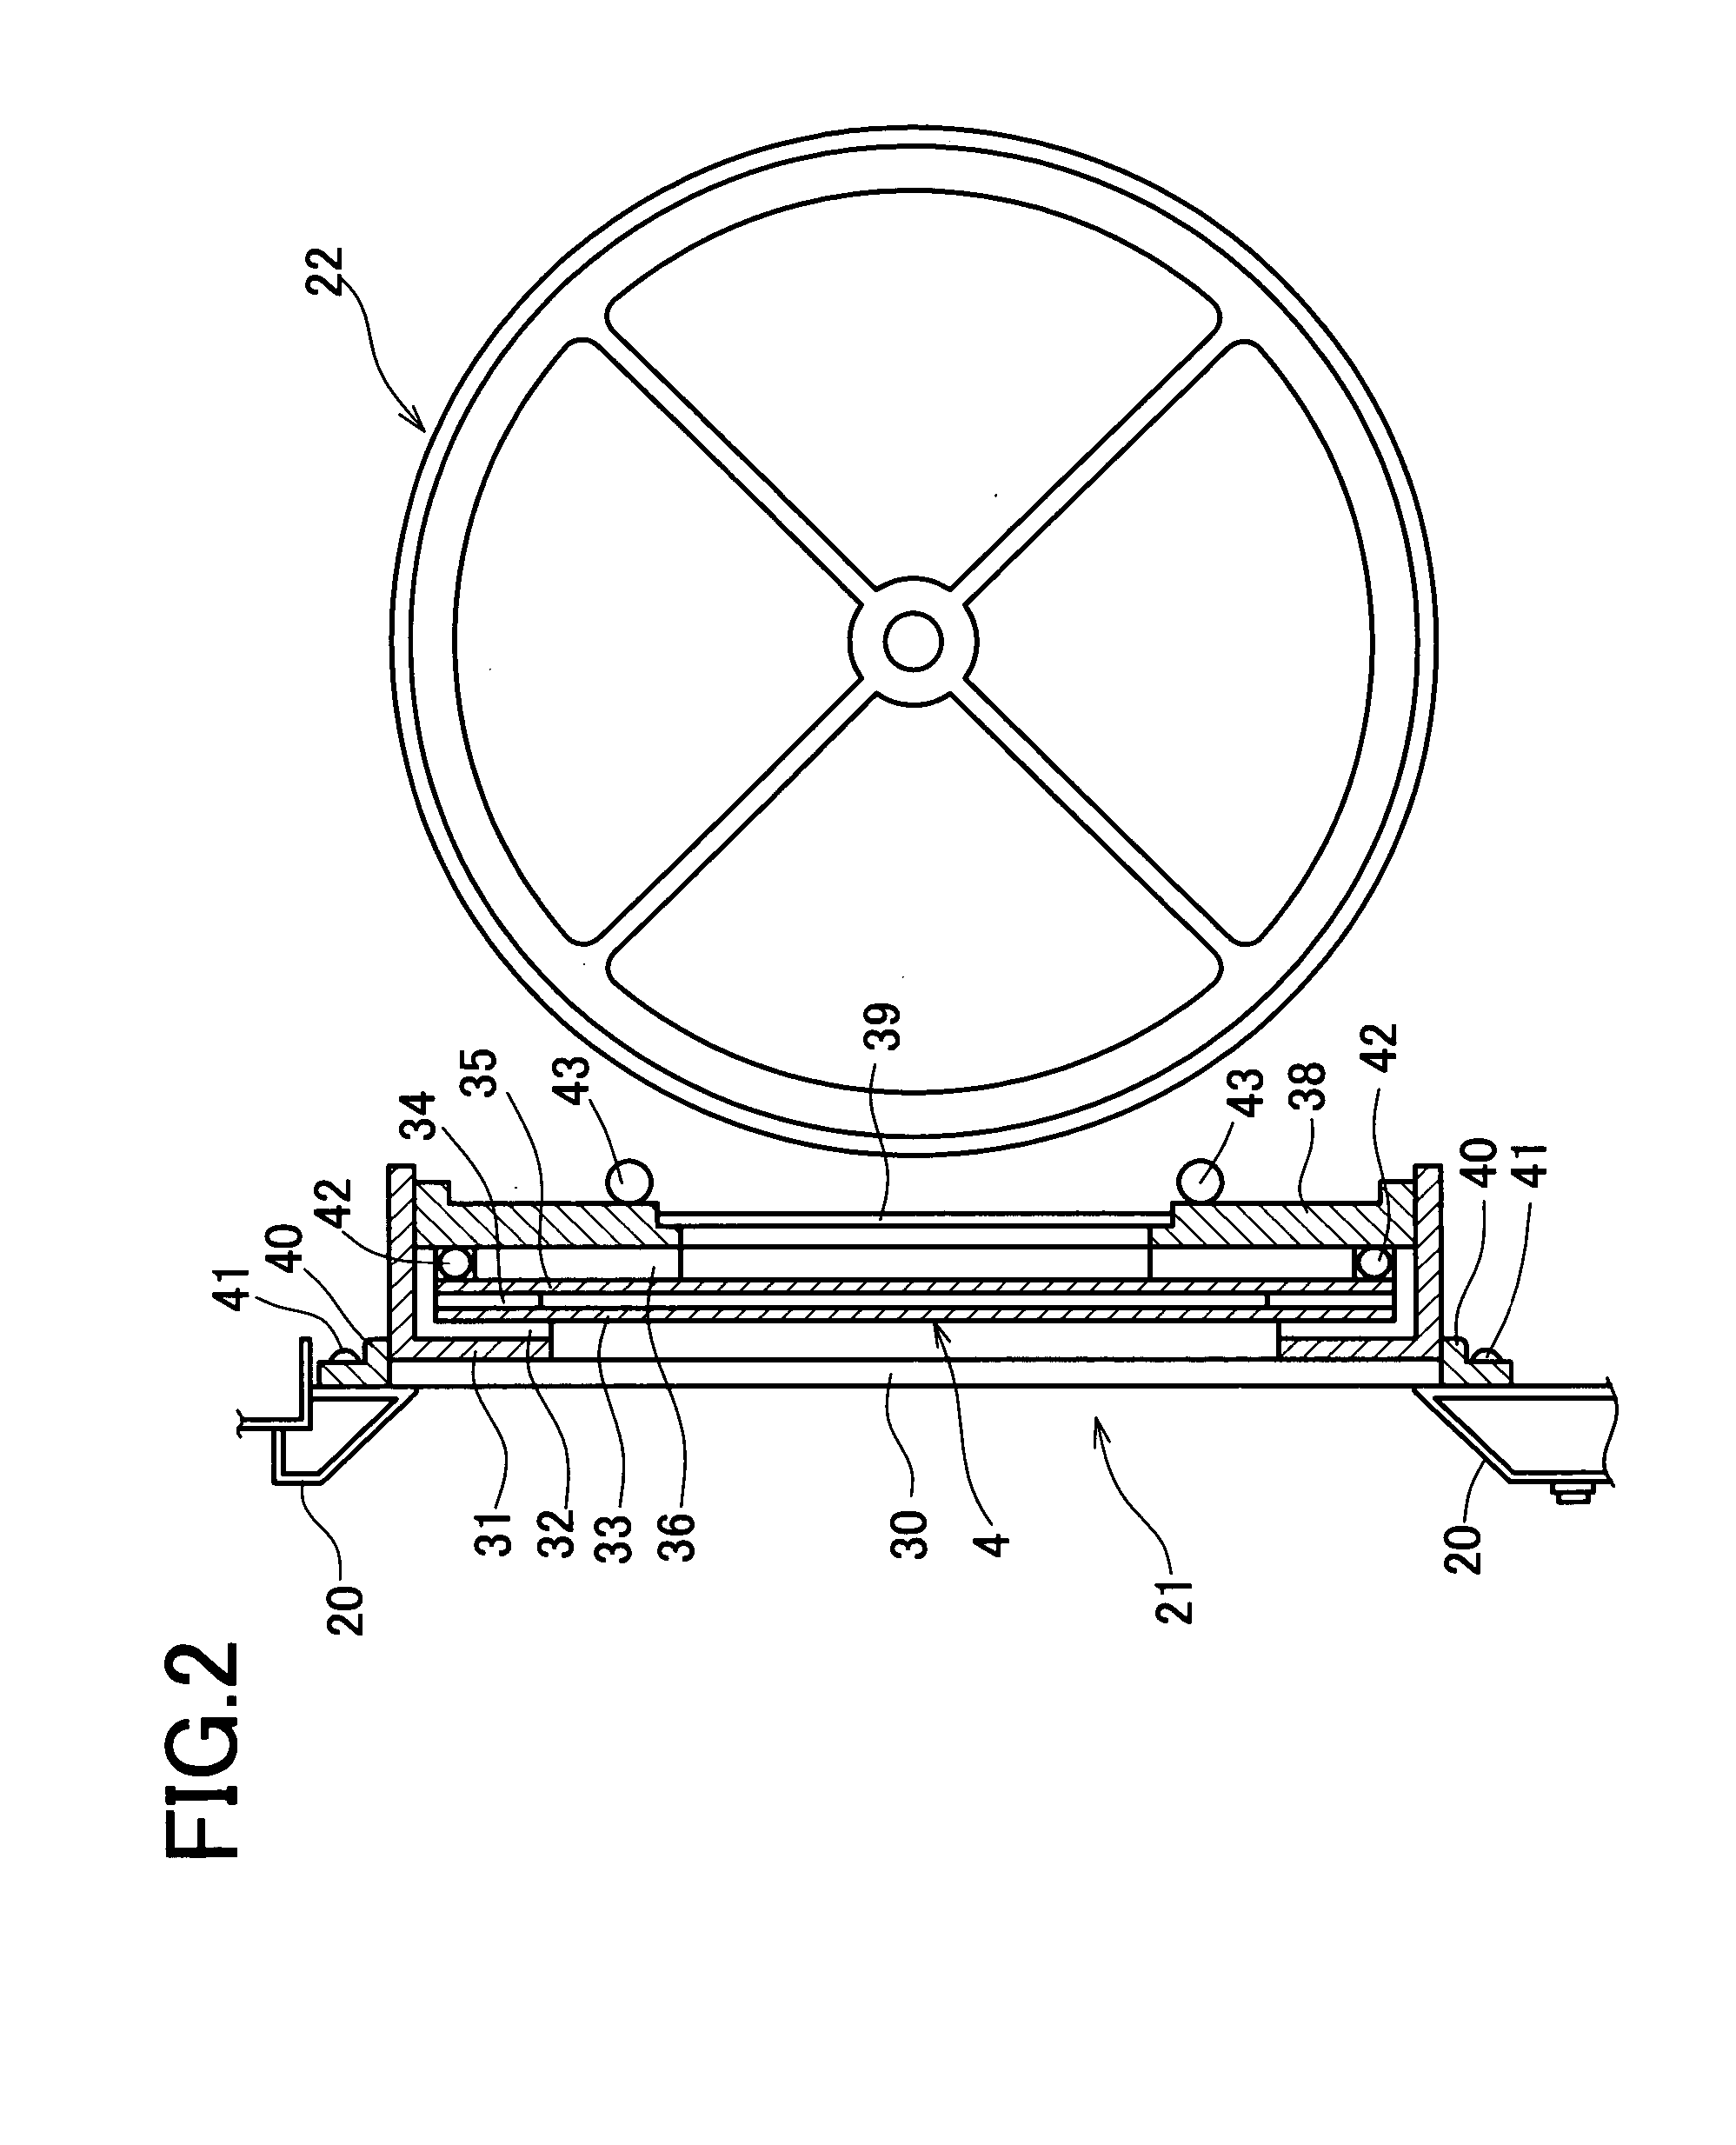 Gaming machine with reels and display device displaying characters thereon, reels being seen through display device